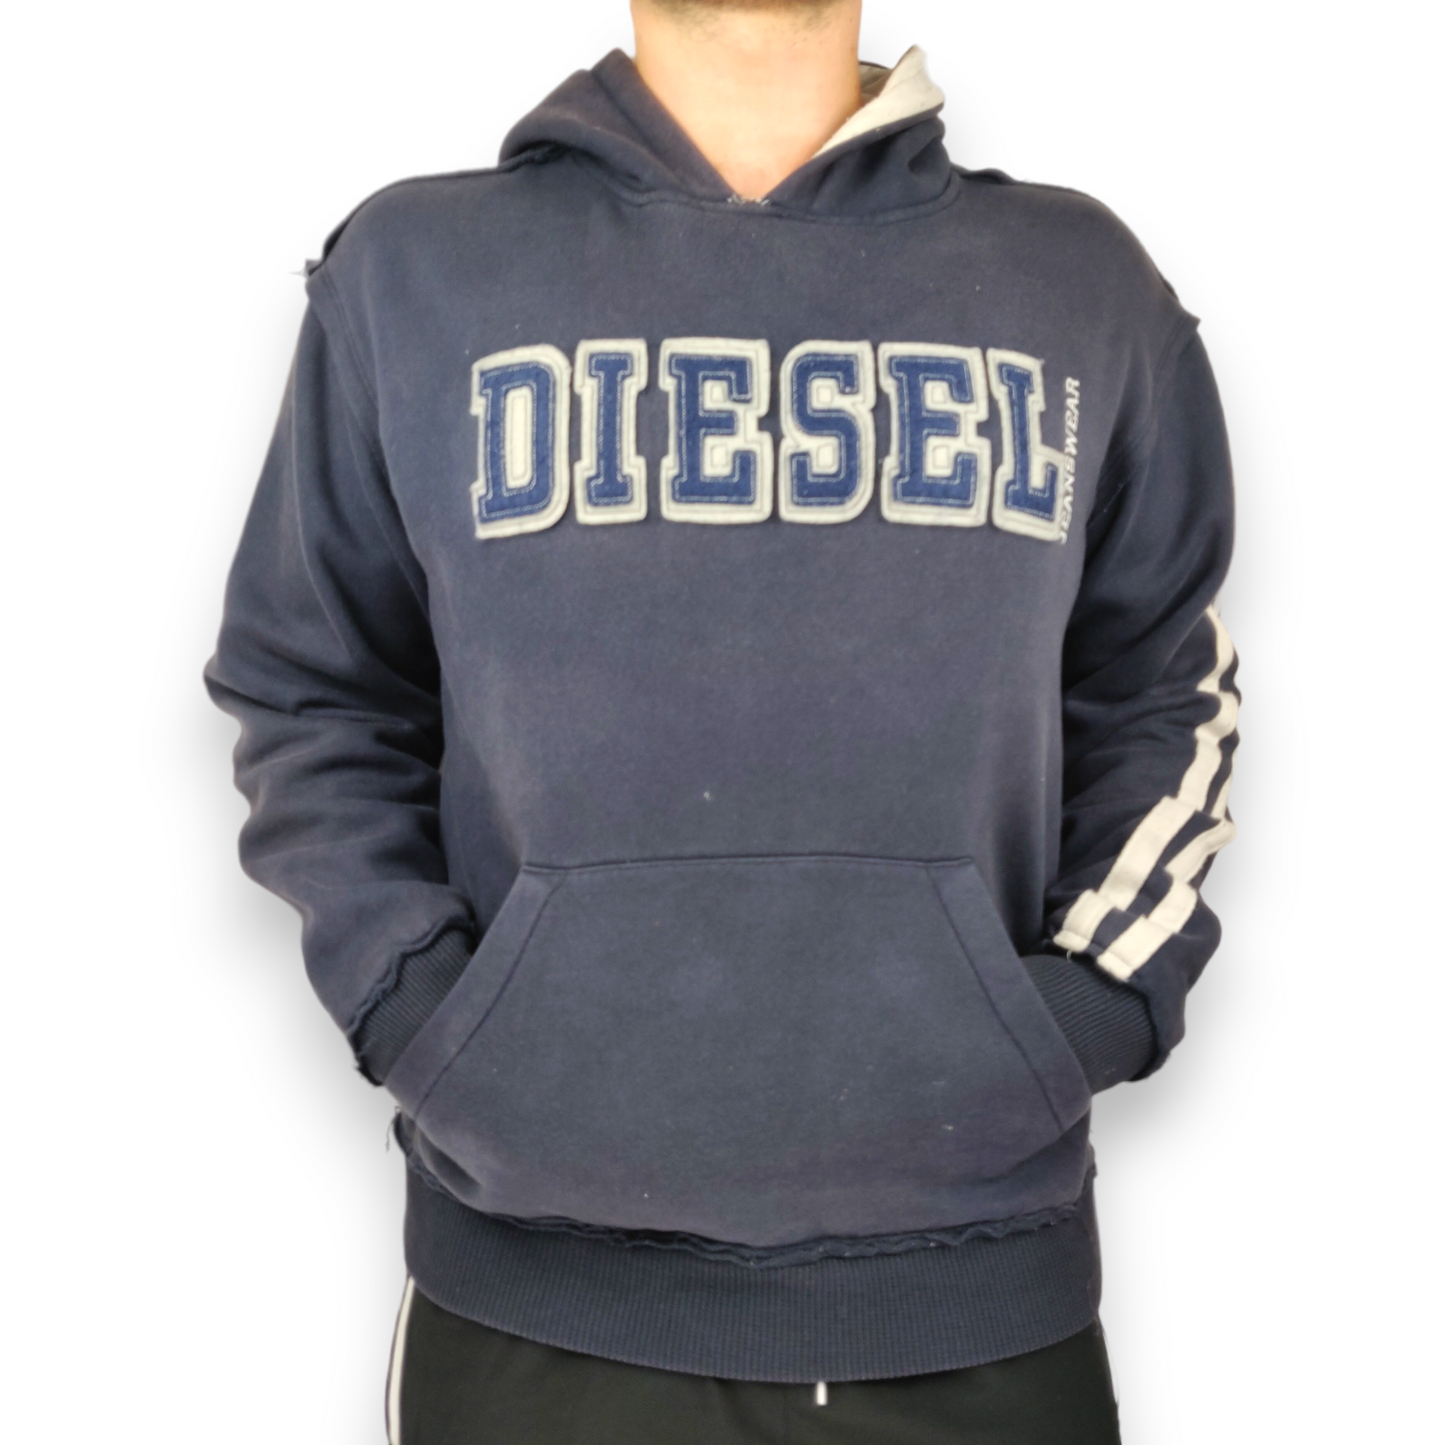 Diesel Jeanswear Vintage Navy Blue Embroidered Pullover Hoodie Men Size Large